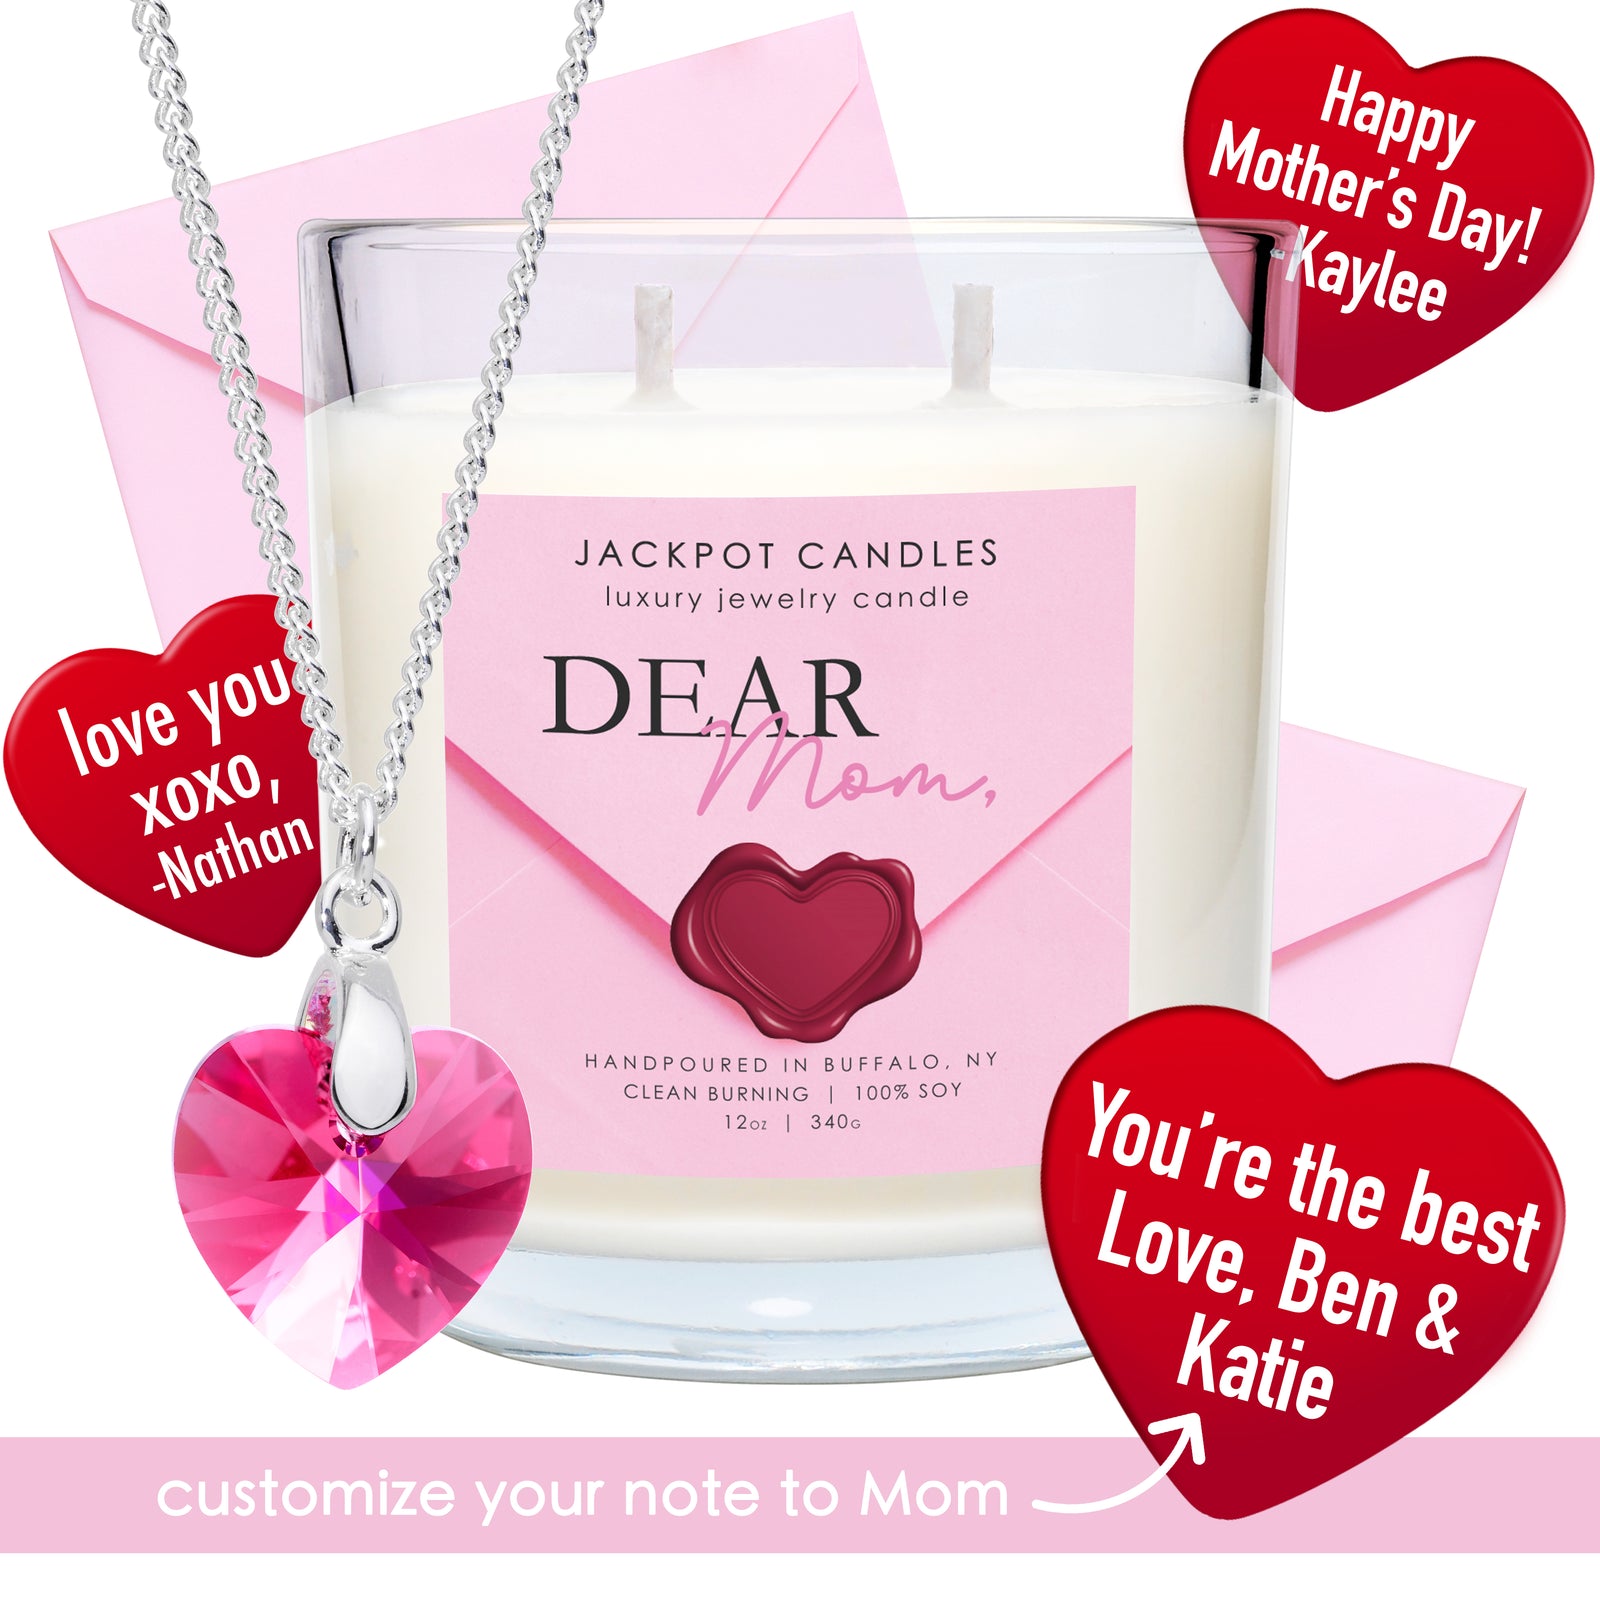 Happy Mother's Day Mom Candle – JadesTropicalCreations